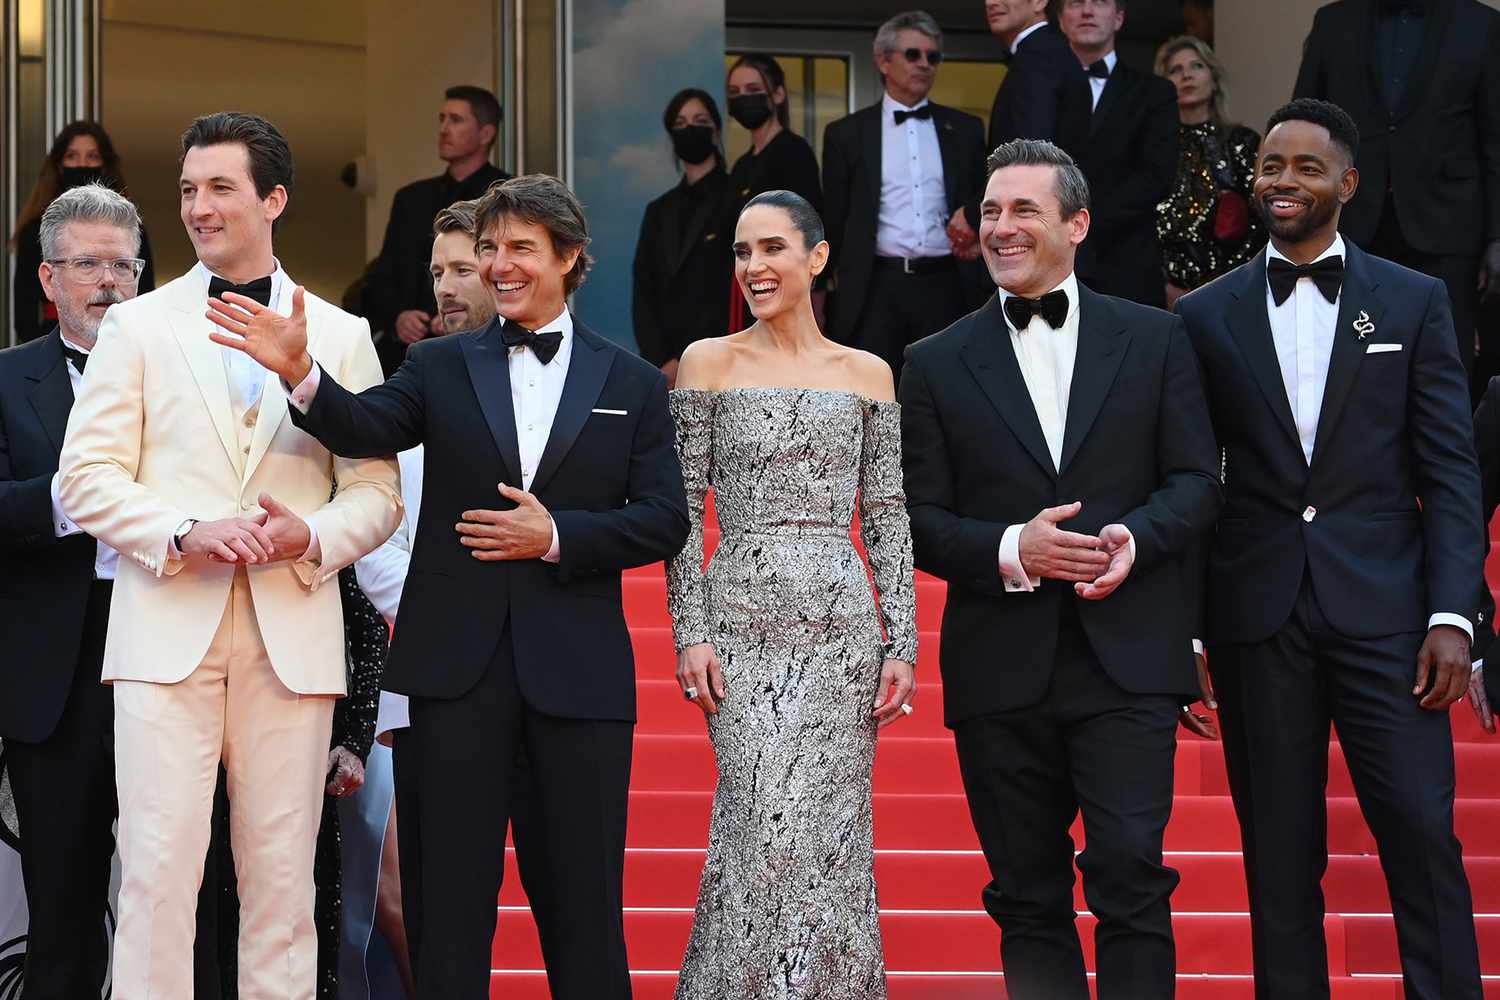 Christopher McQuarrie, Miles Teller, Glen Powell, Tom Cruise, Jennifer Connelly, Jon Hamm and Jay Ellis attend the screening of "Top Gun: Maverick" during the 75th annual Cannes film festival at Palais des Festivals on May 18, 2022 in Cannes, France.